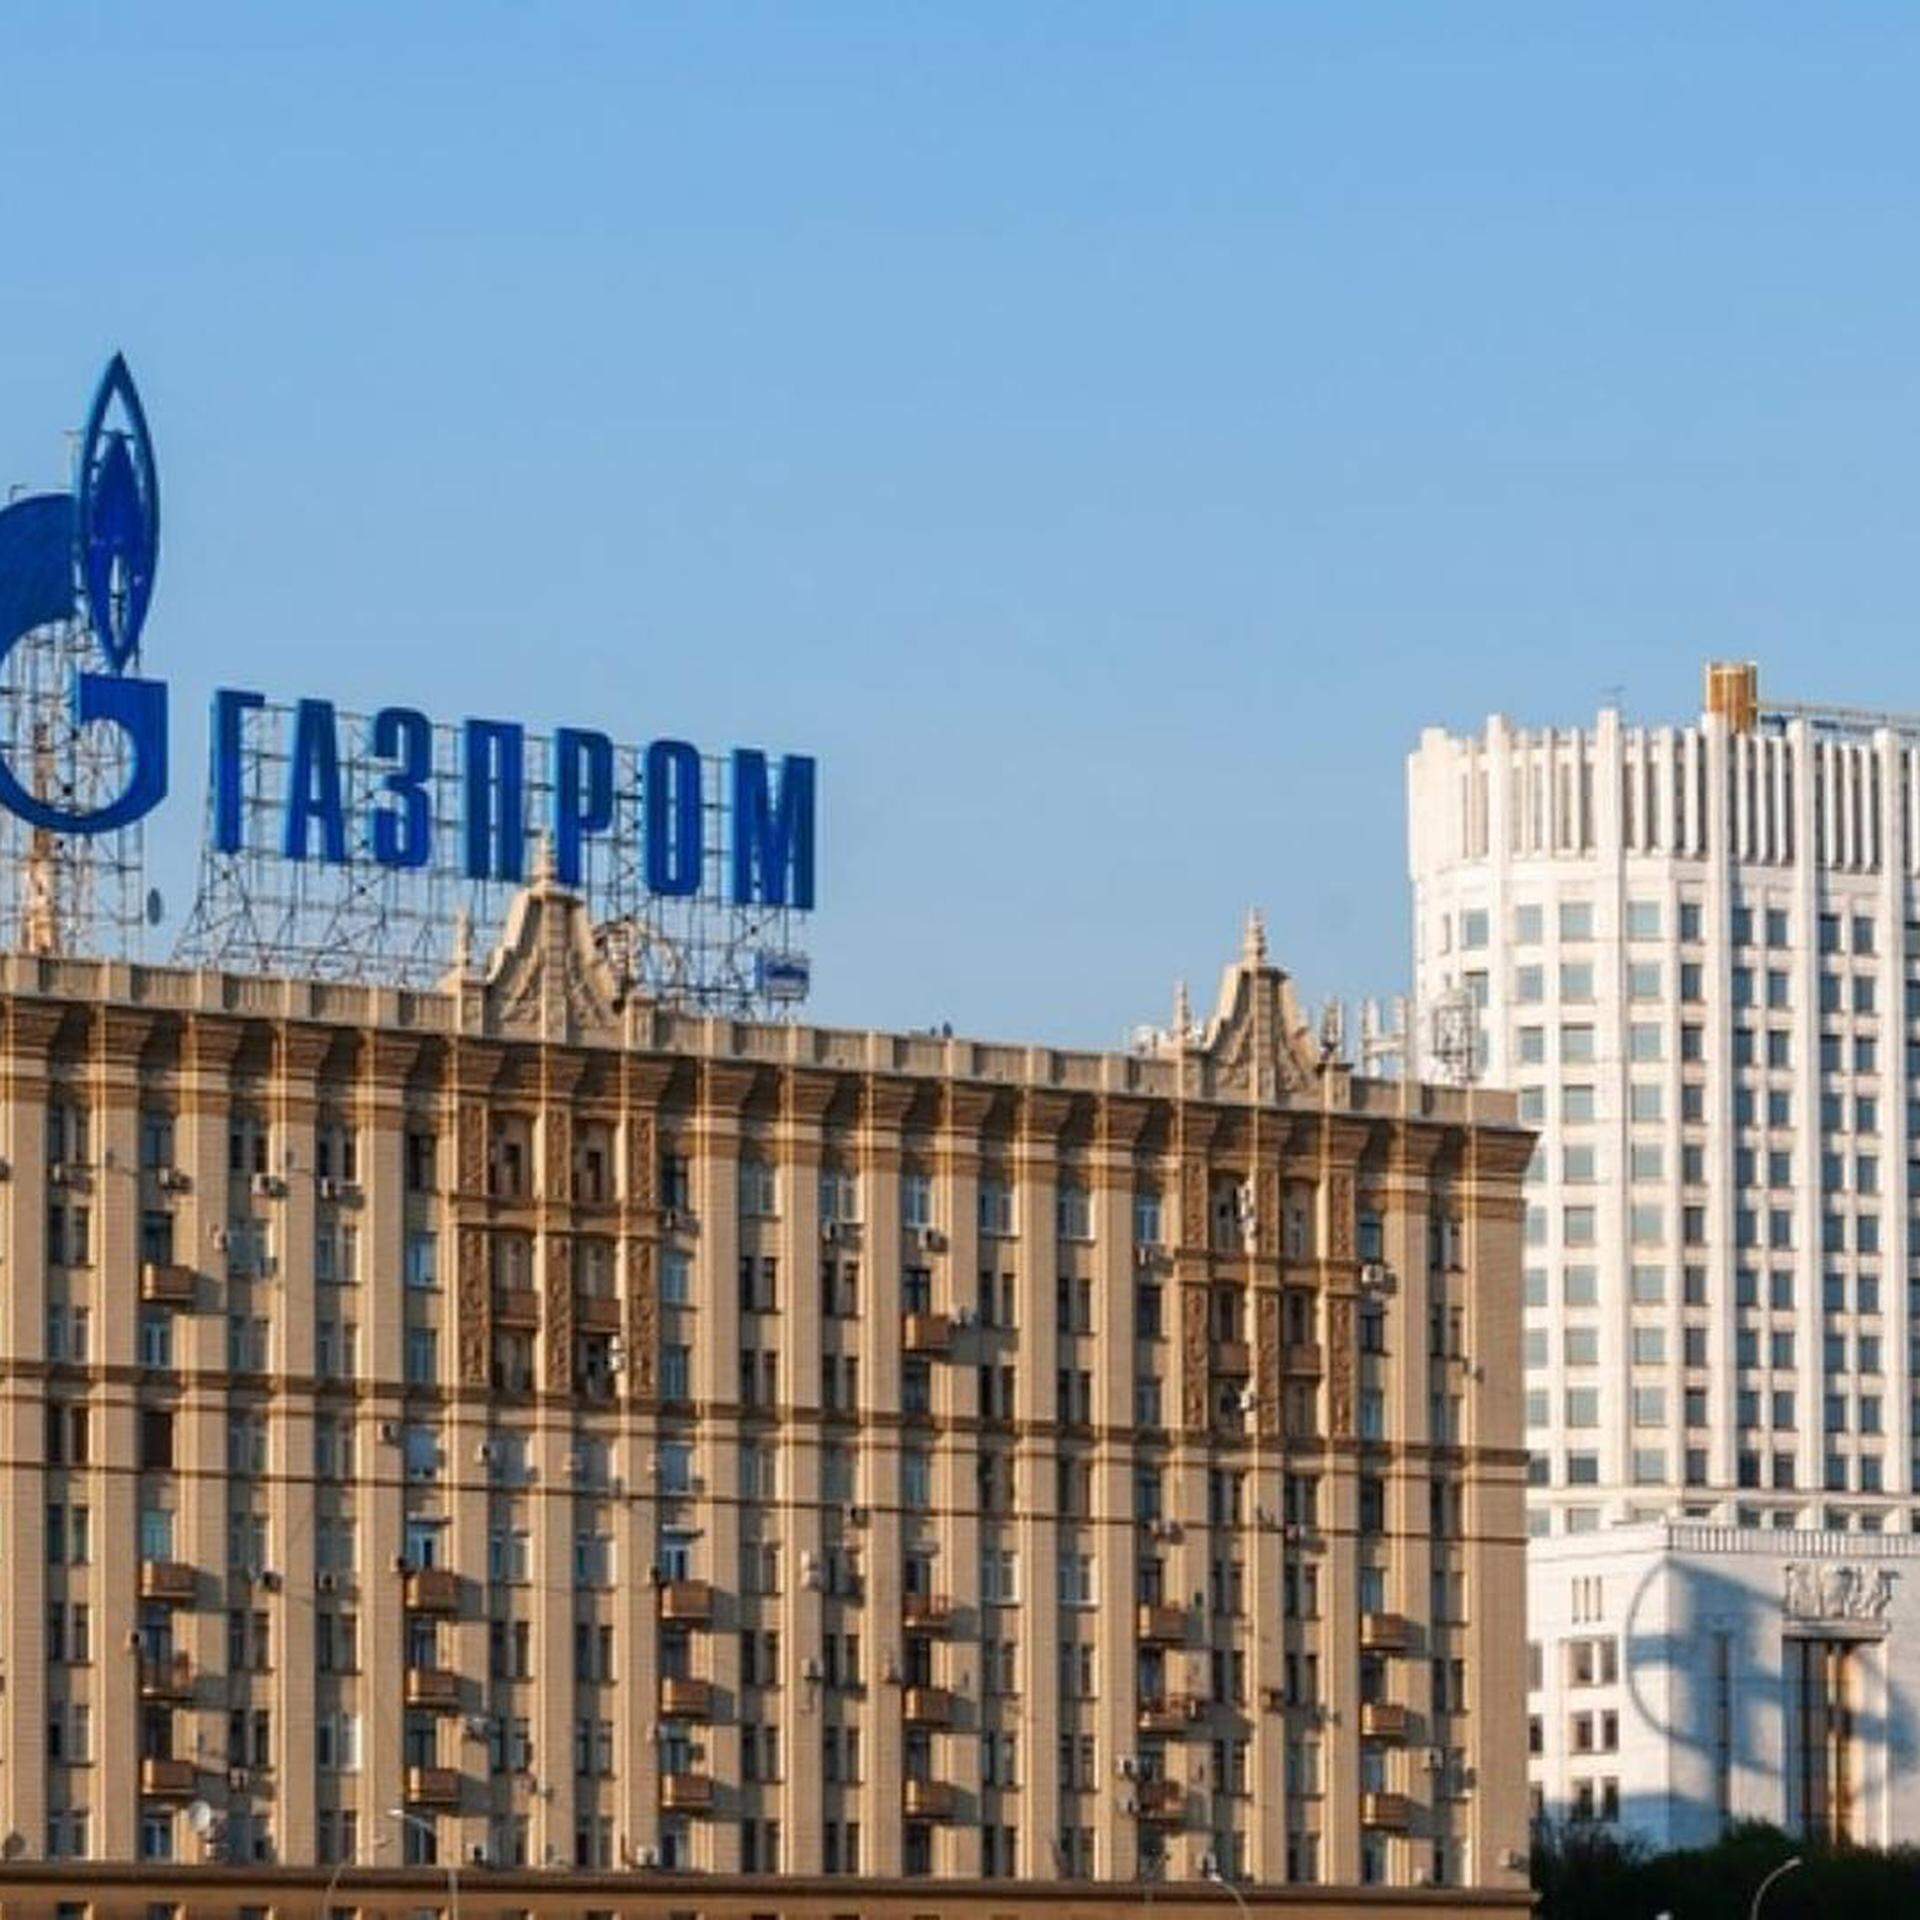 Gazprom recorded losses following war in Ukraine and subsequent EU sanctions